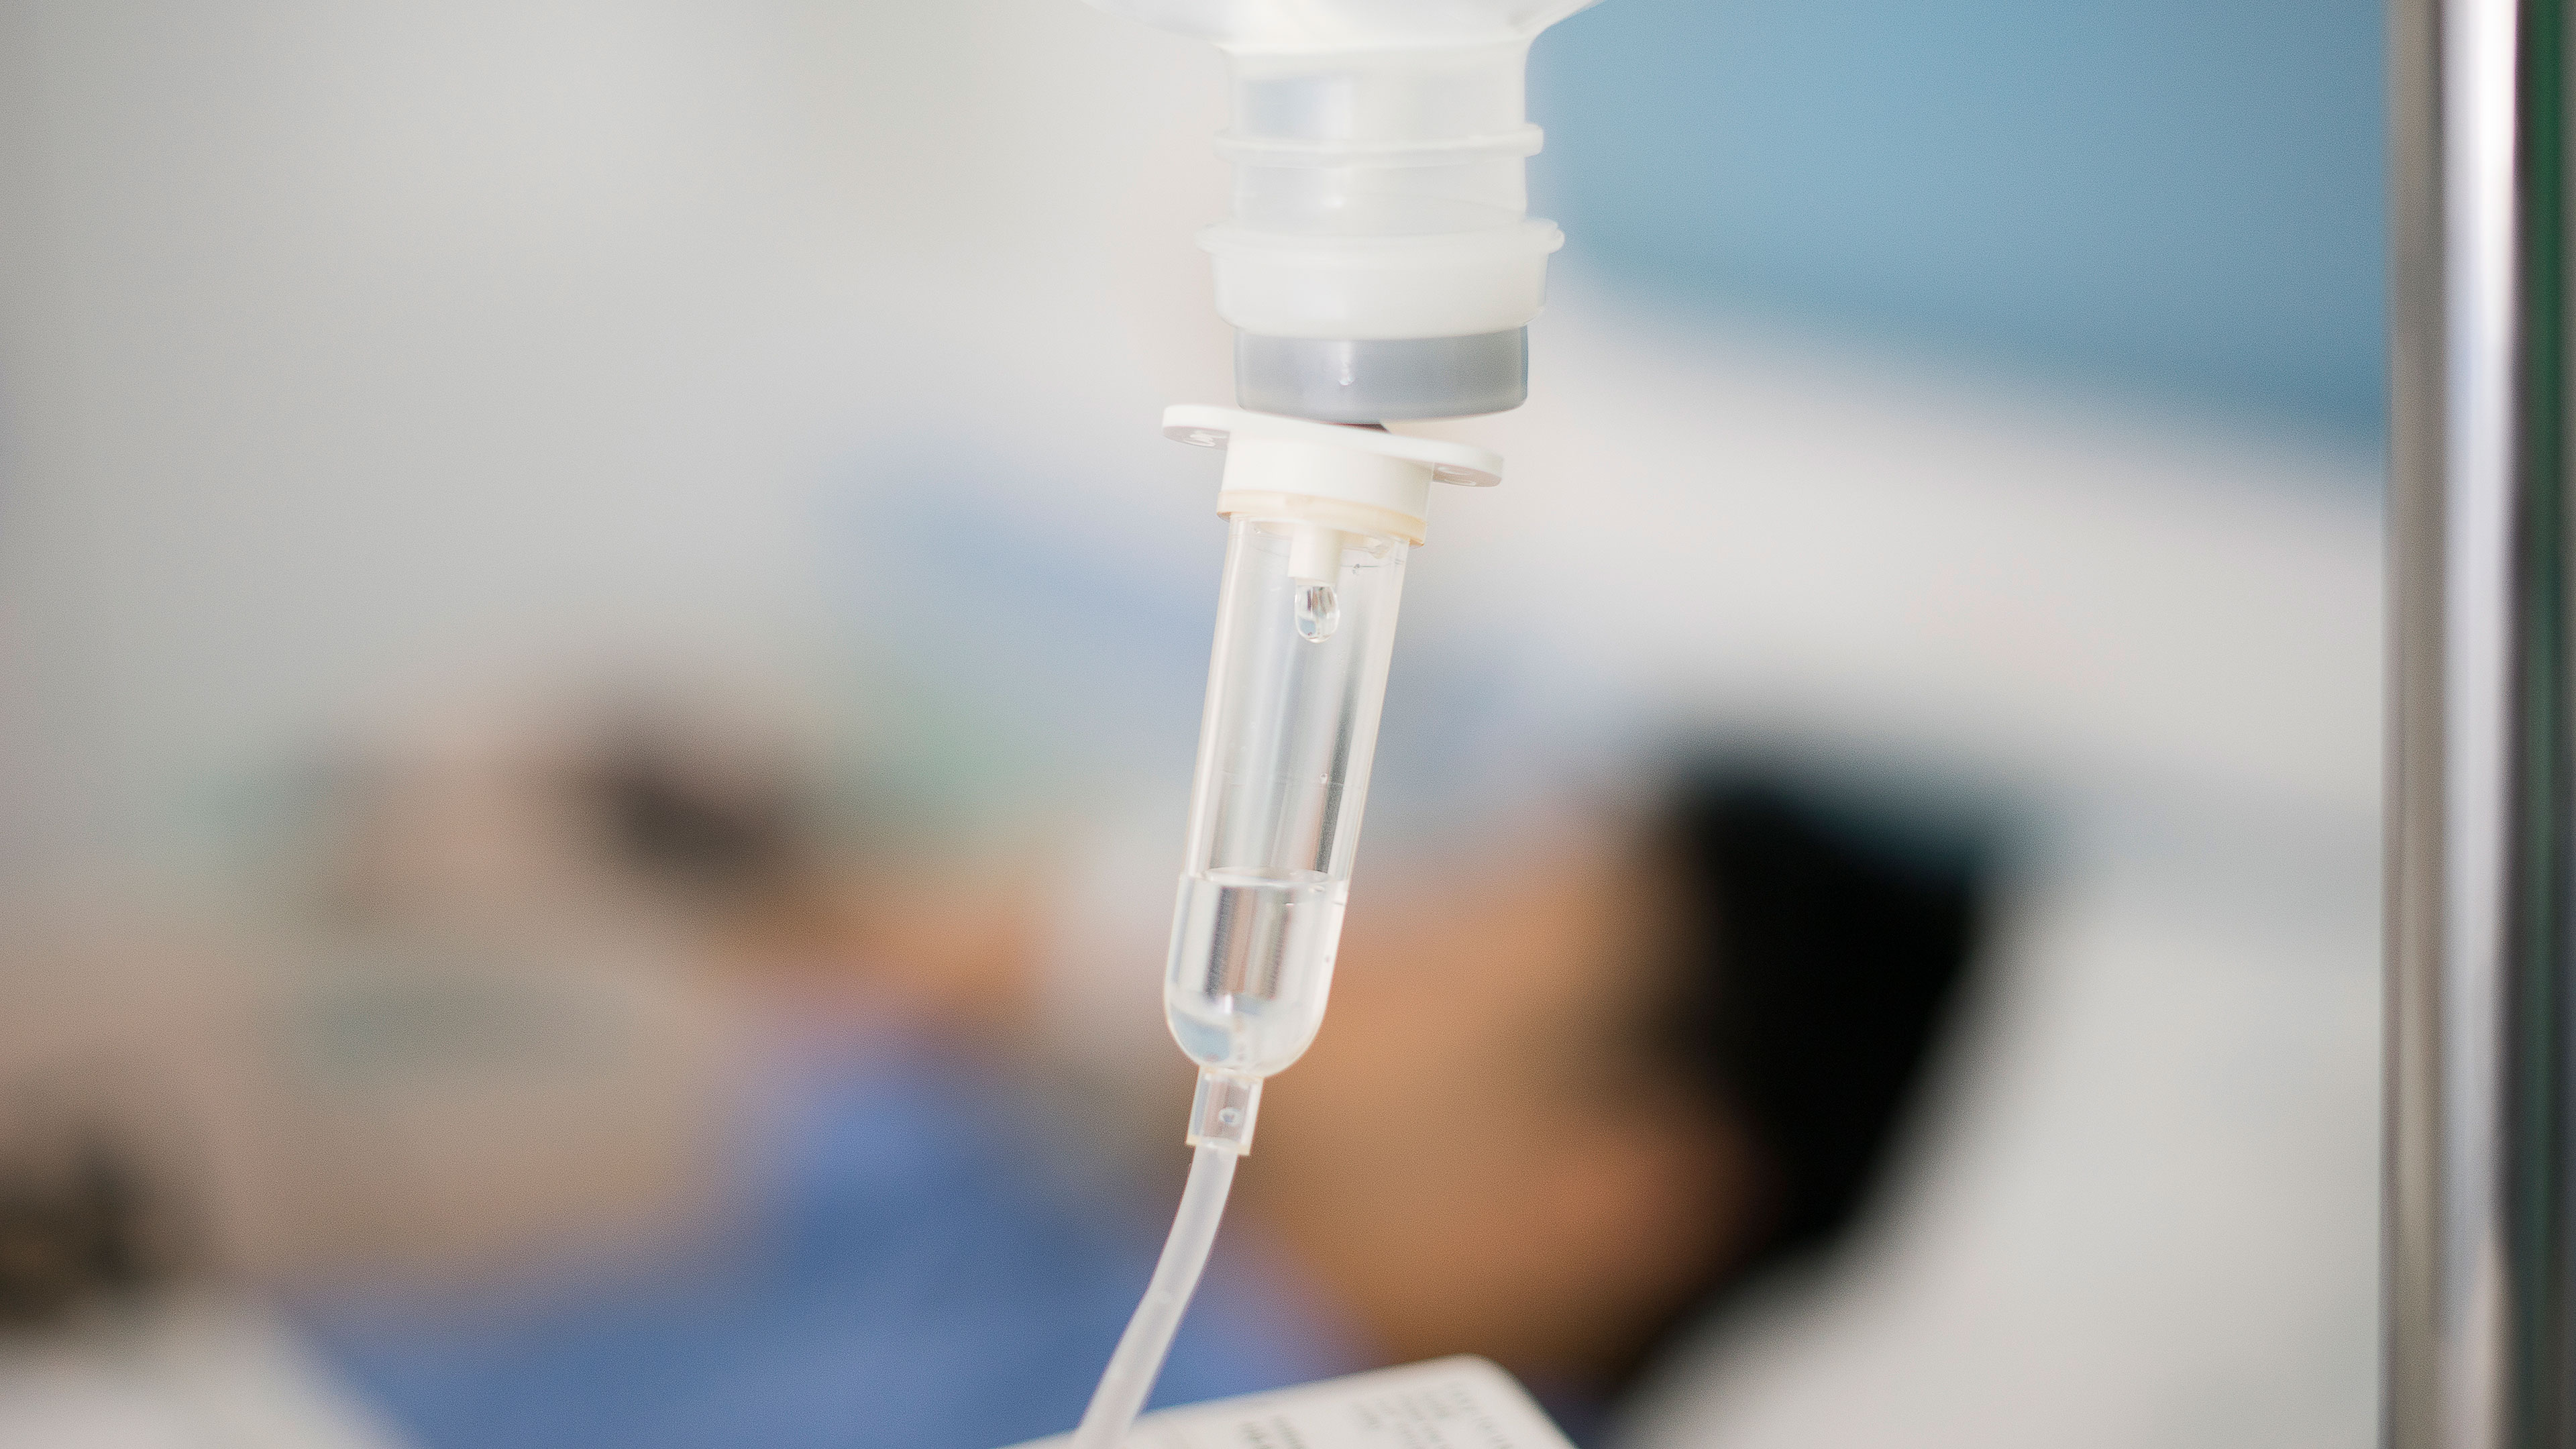 Covid 19: Medical Saline Shortage Hits . Hospitals Reeling From Omicron  - Bloomberg